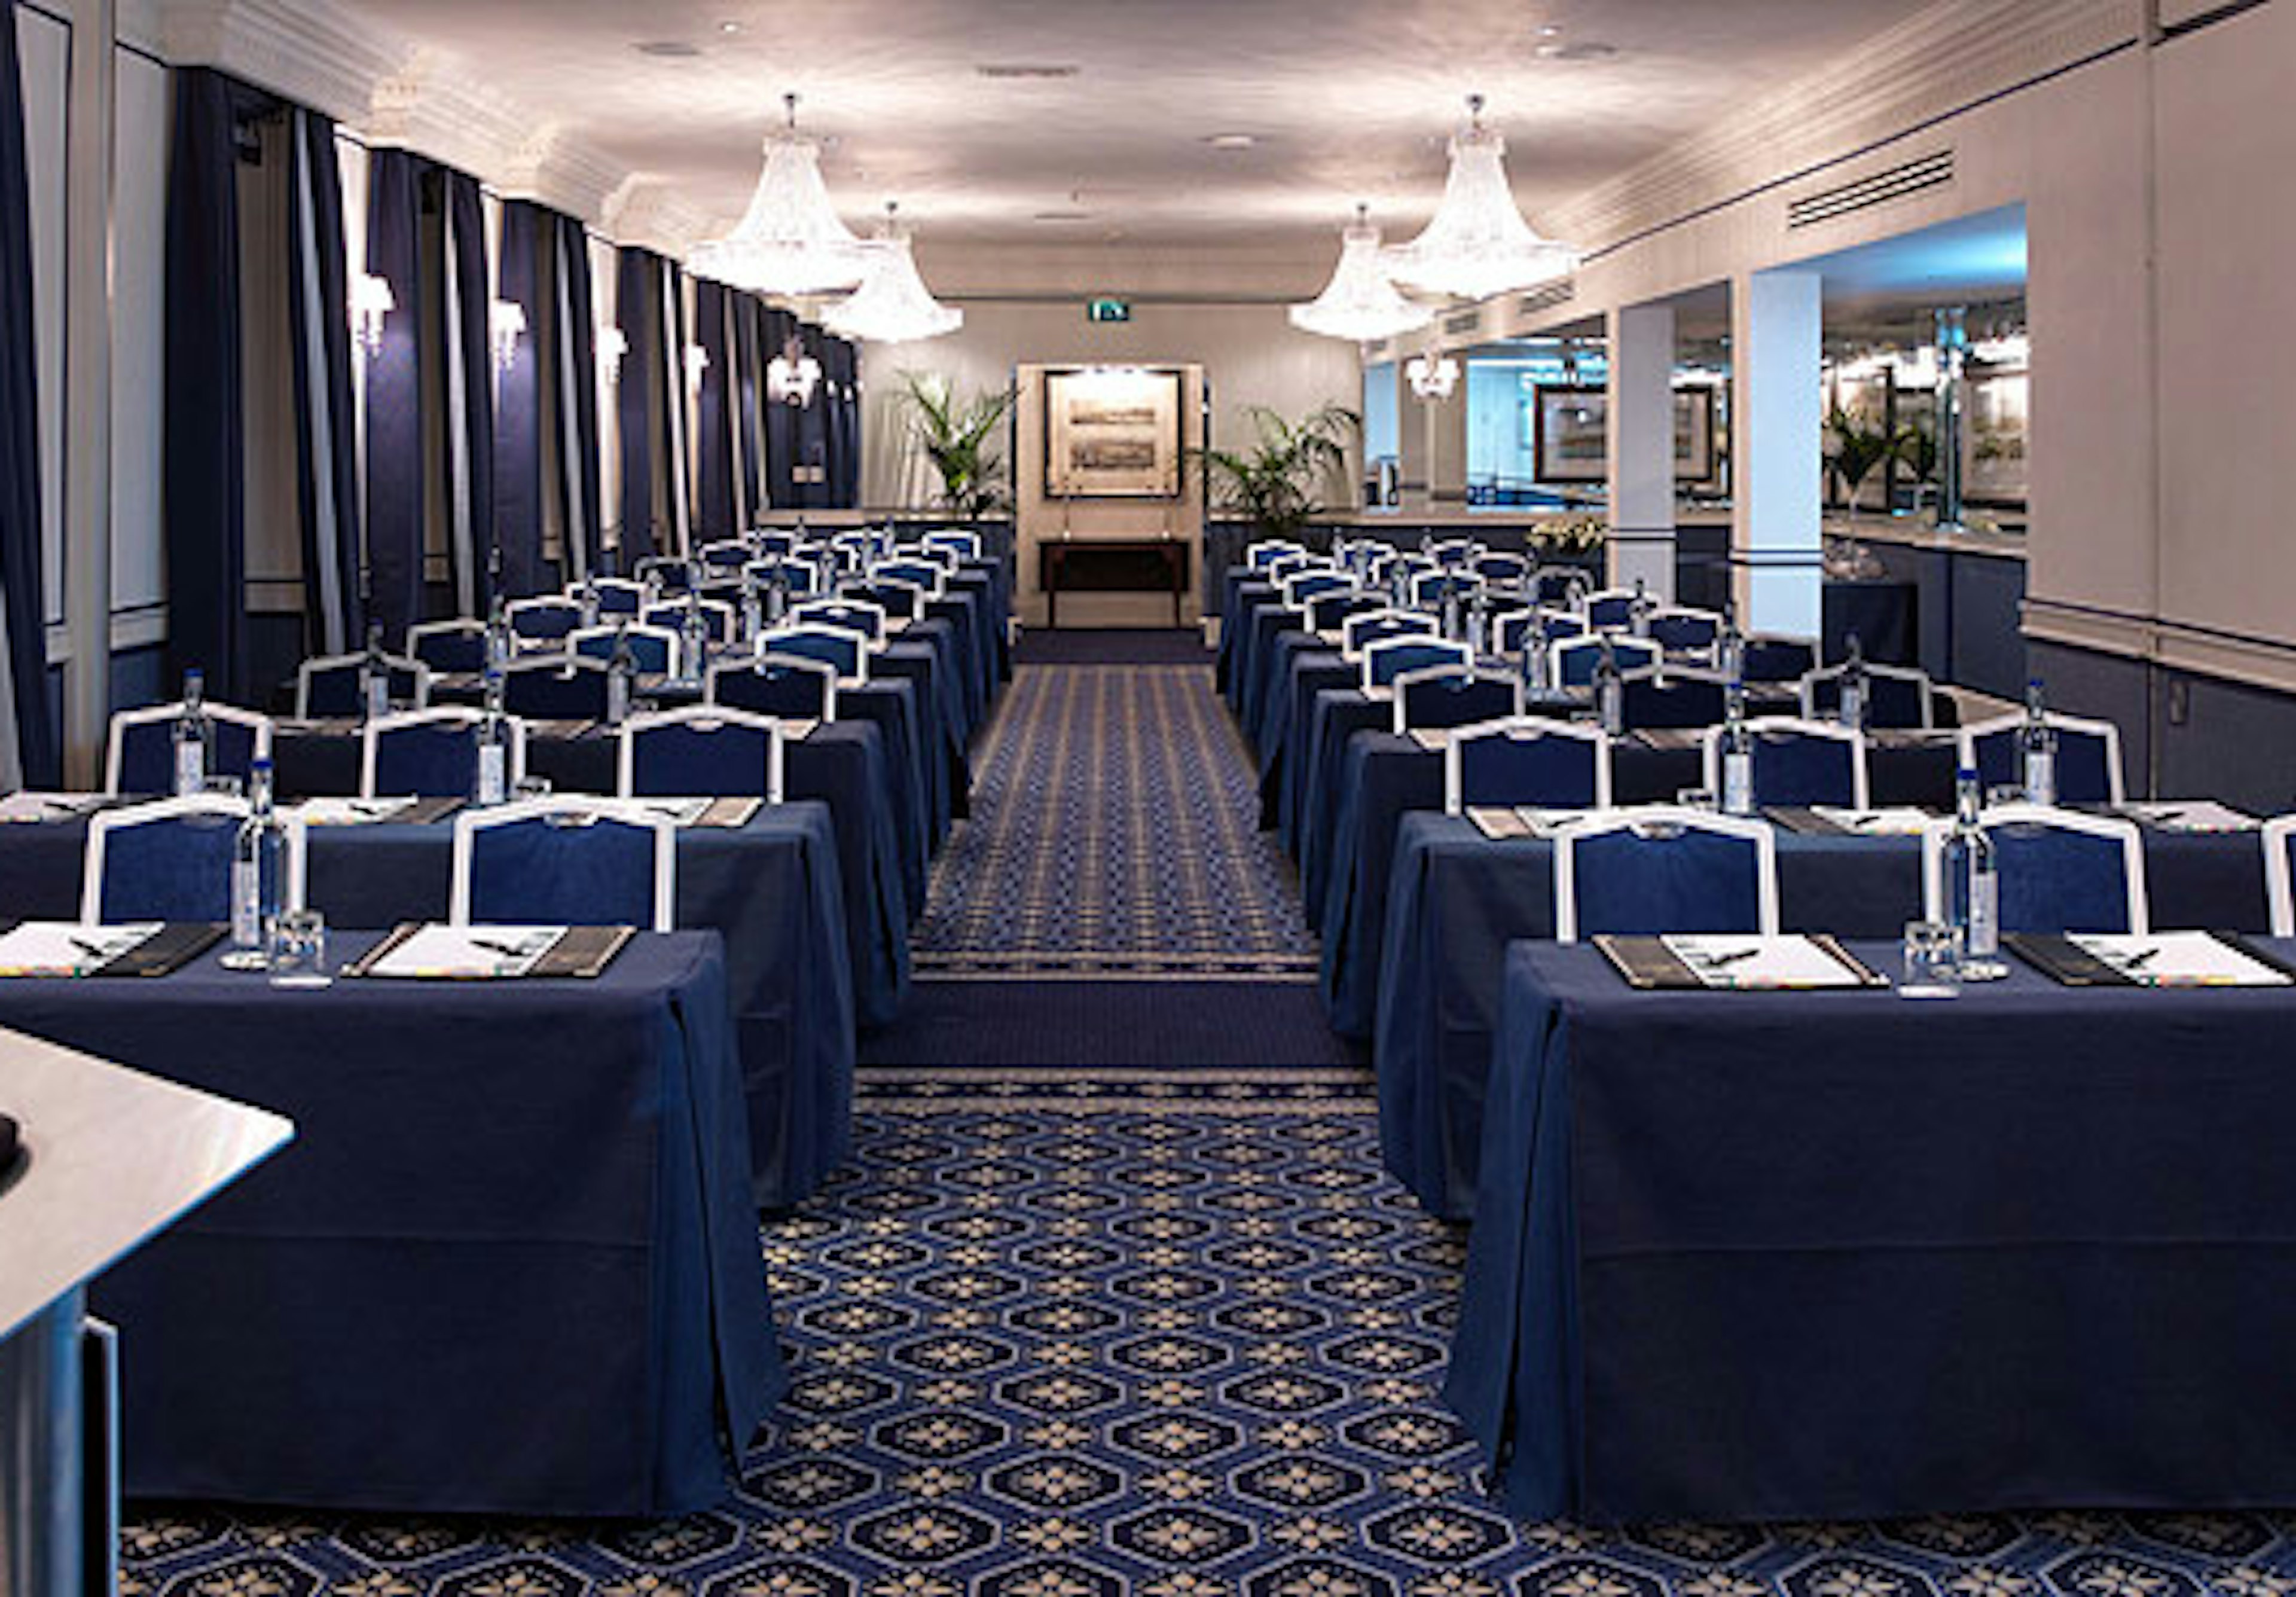 Business - The Chesterfield Mayfair Hotel